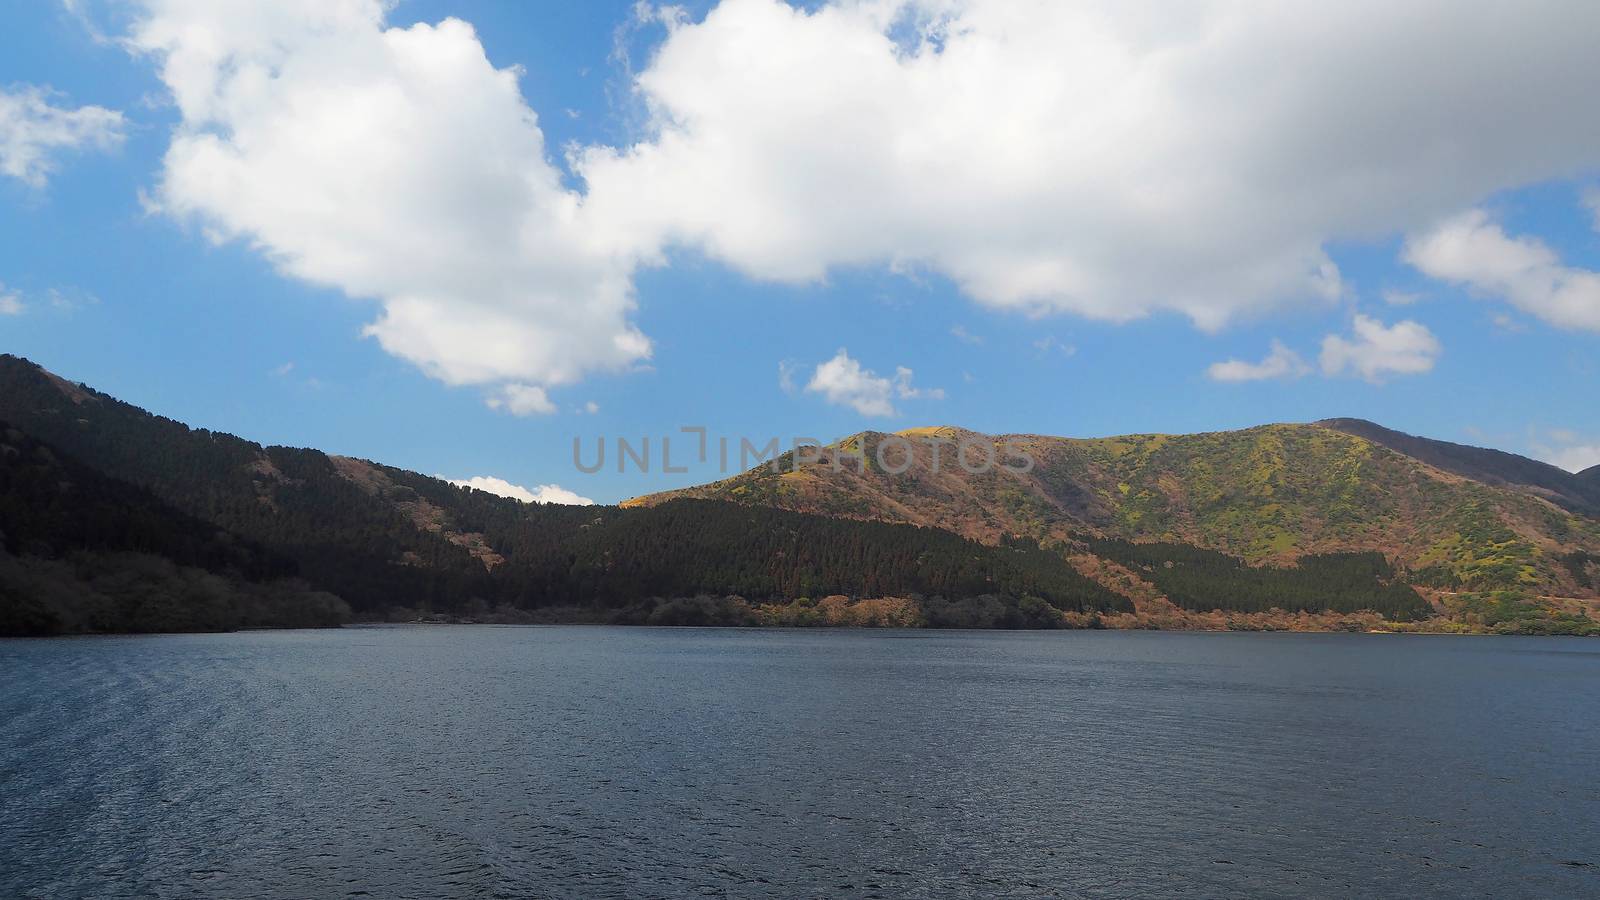 Hill and lake and clear blue sky and white clouds at five lakes near Kawaguchiko Tokyo Japan in winter season.